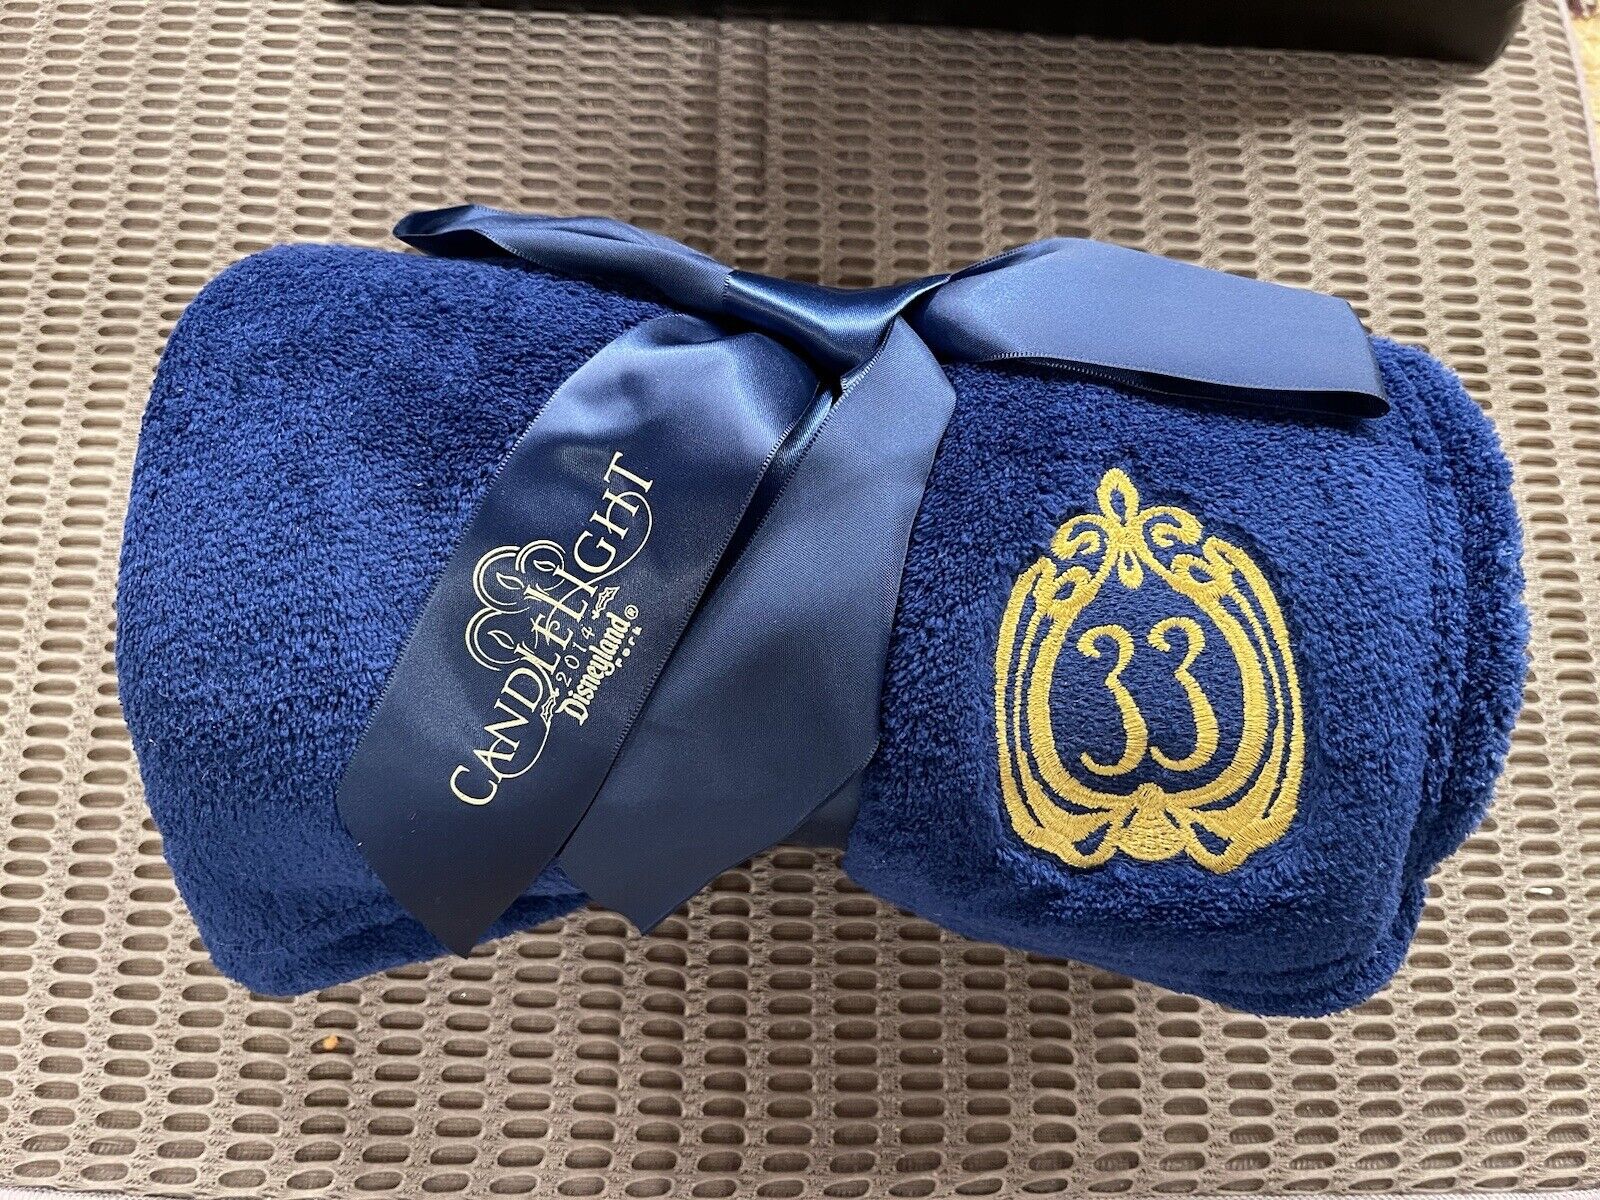 CLUB 33 BLUE LAP BLANKET WITH GOLD CLUB LOGO From Disneyland Candlelight- New